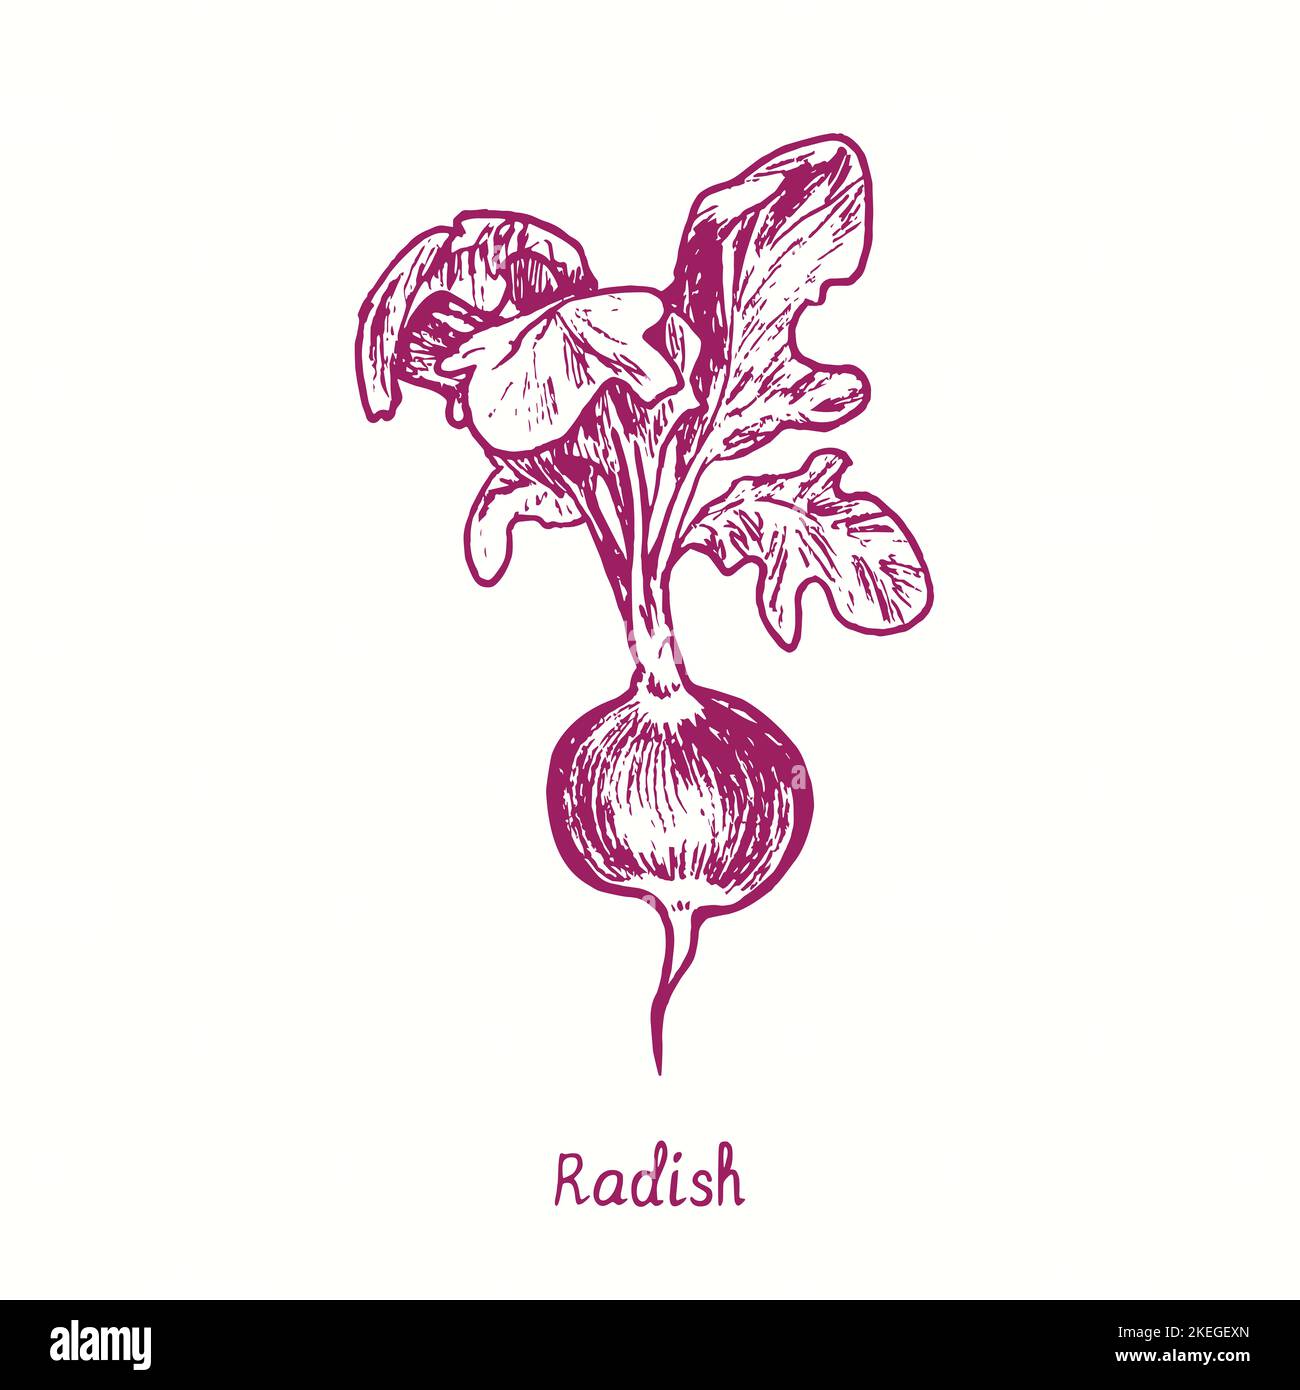 Radish. Ink black and white doodle drawing in woodcut style Stock Photo